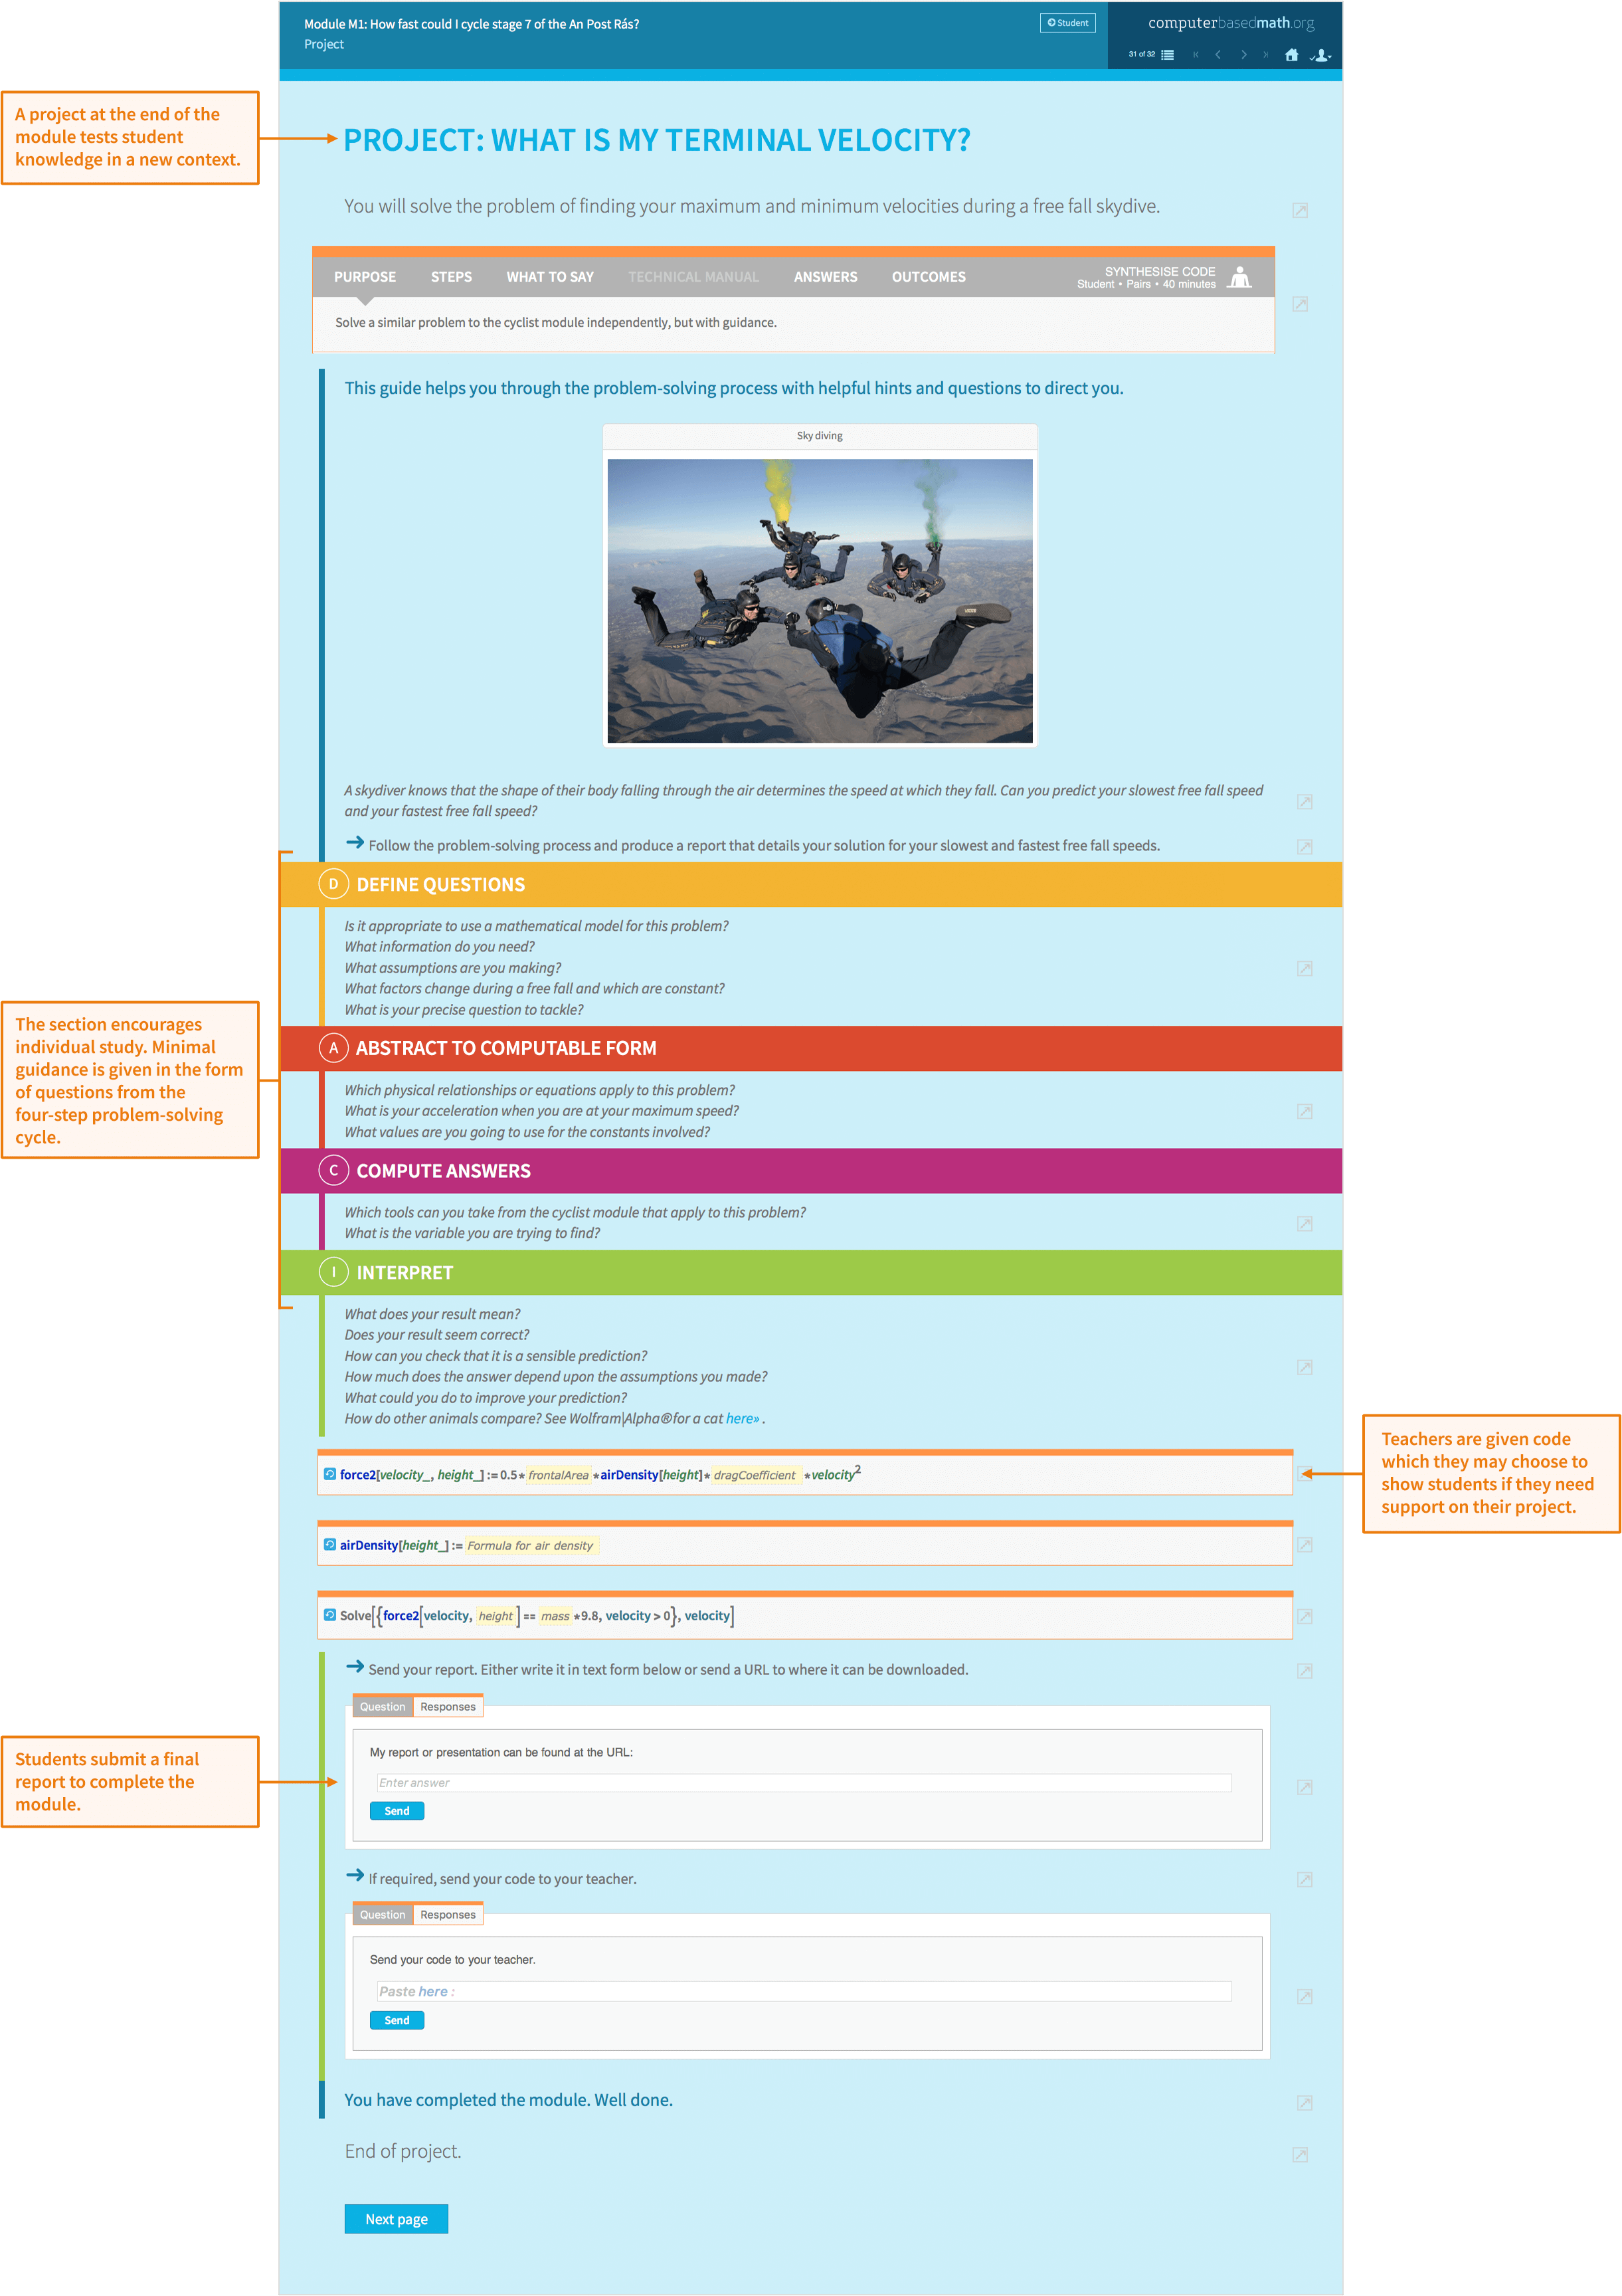 Sample post-activity project about finding terminal velocity. Teacher view shows the new problem to be solved, problem-solving questions, code hints and the student's final report.